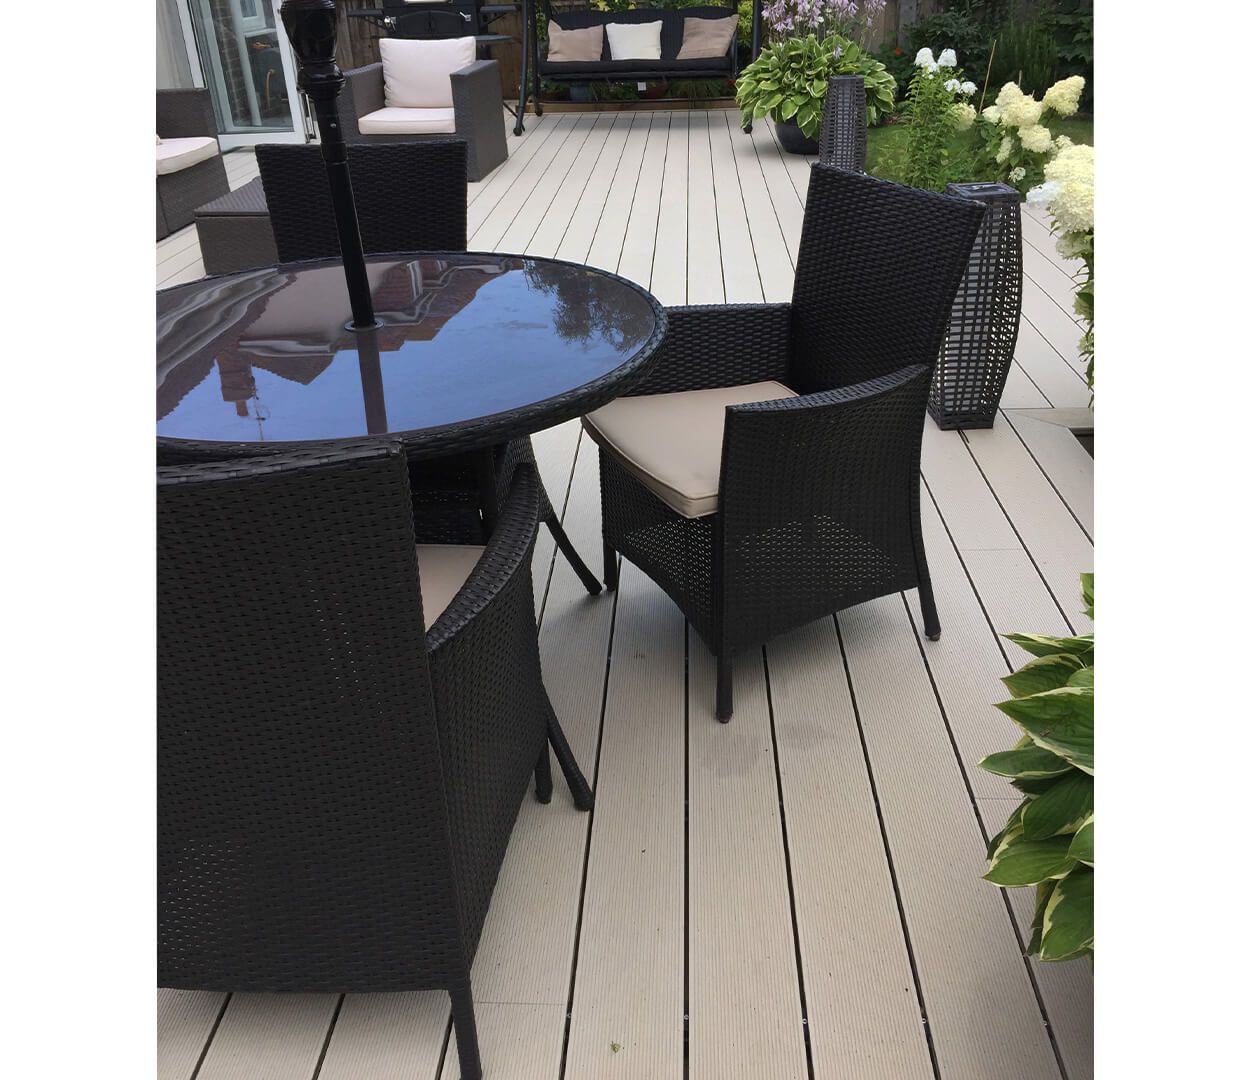 Cladco Ivory Decking Boards on patio renovation.